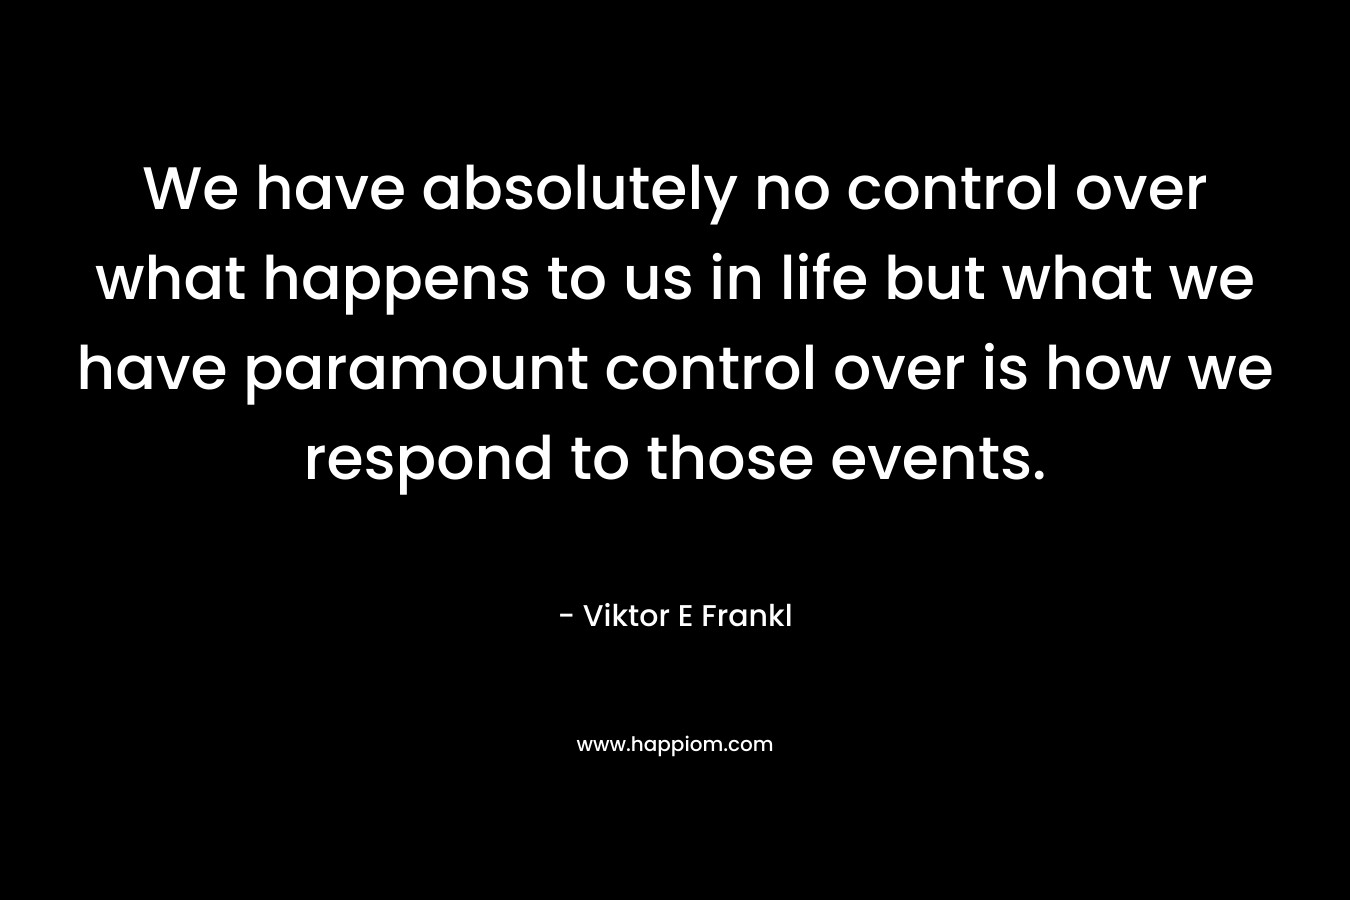 We have absolutely no control over what happens to us in life but what we have paramount control over is how we respond to those events. – Viktor E Frankl